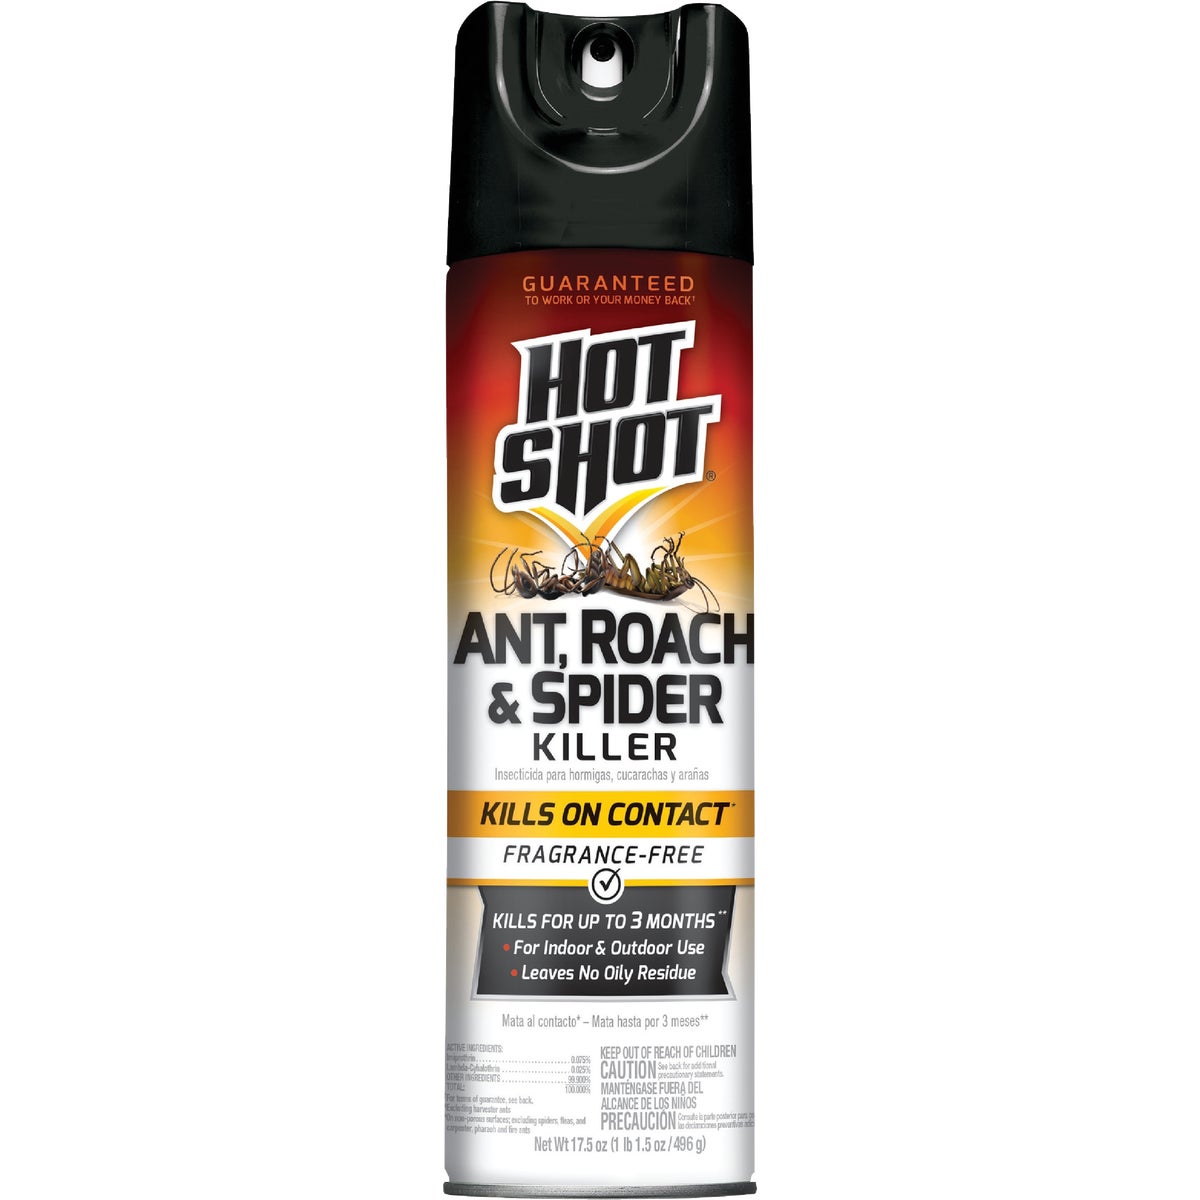 Item 705827, Aerosol spray ant, roach, and spider killer that kills on contact.